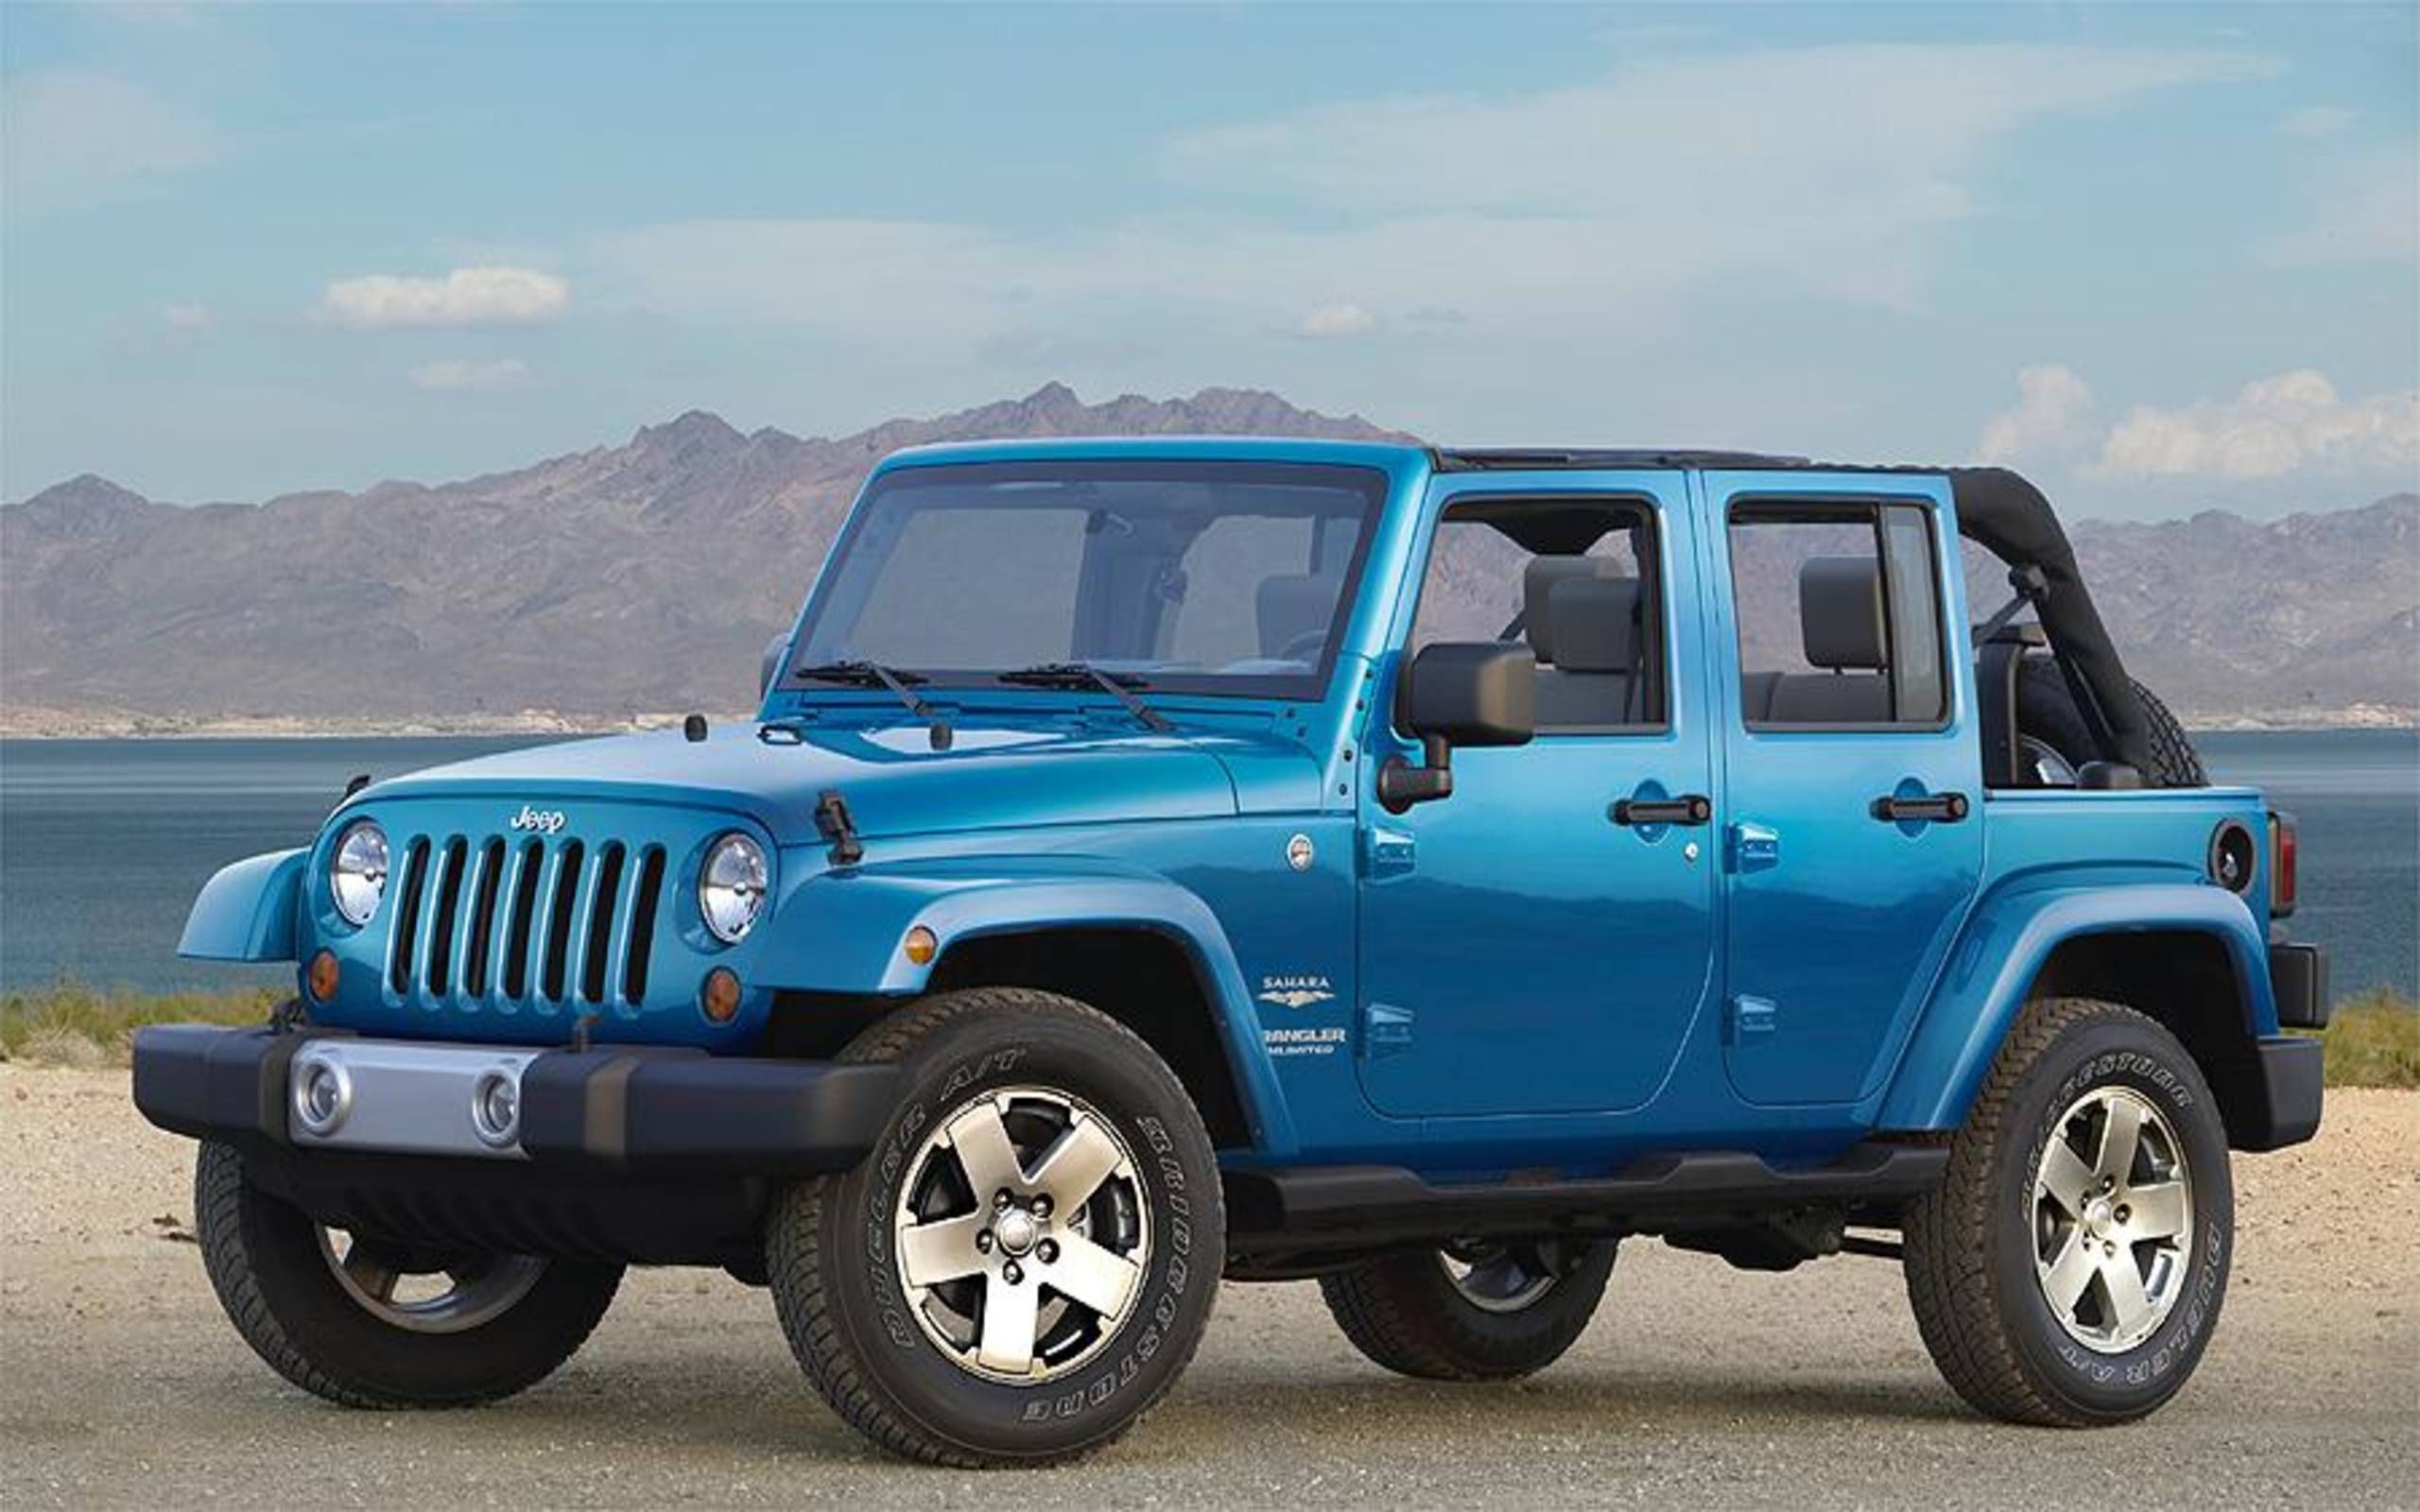 The 2009 Jeep Wrangler Unlimited Sahara - an AutoWeek Performance Review